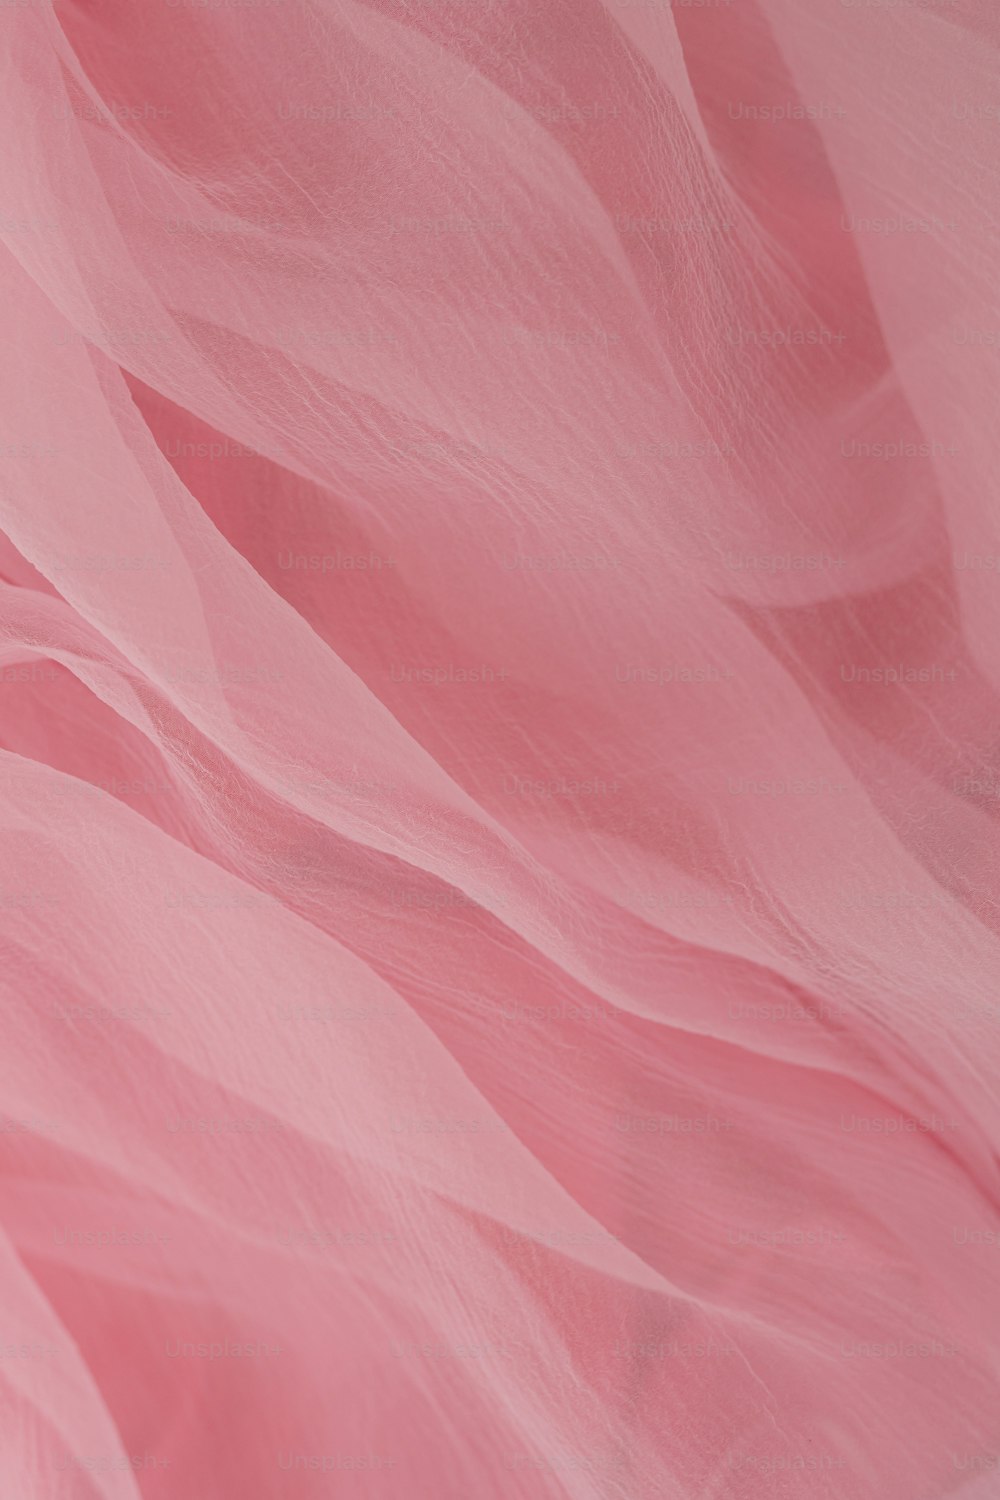 a close up of a pink fabric with a white background